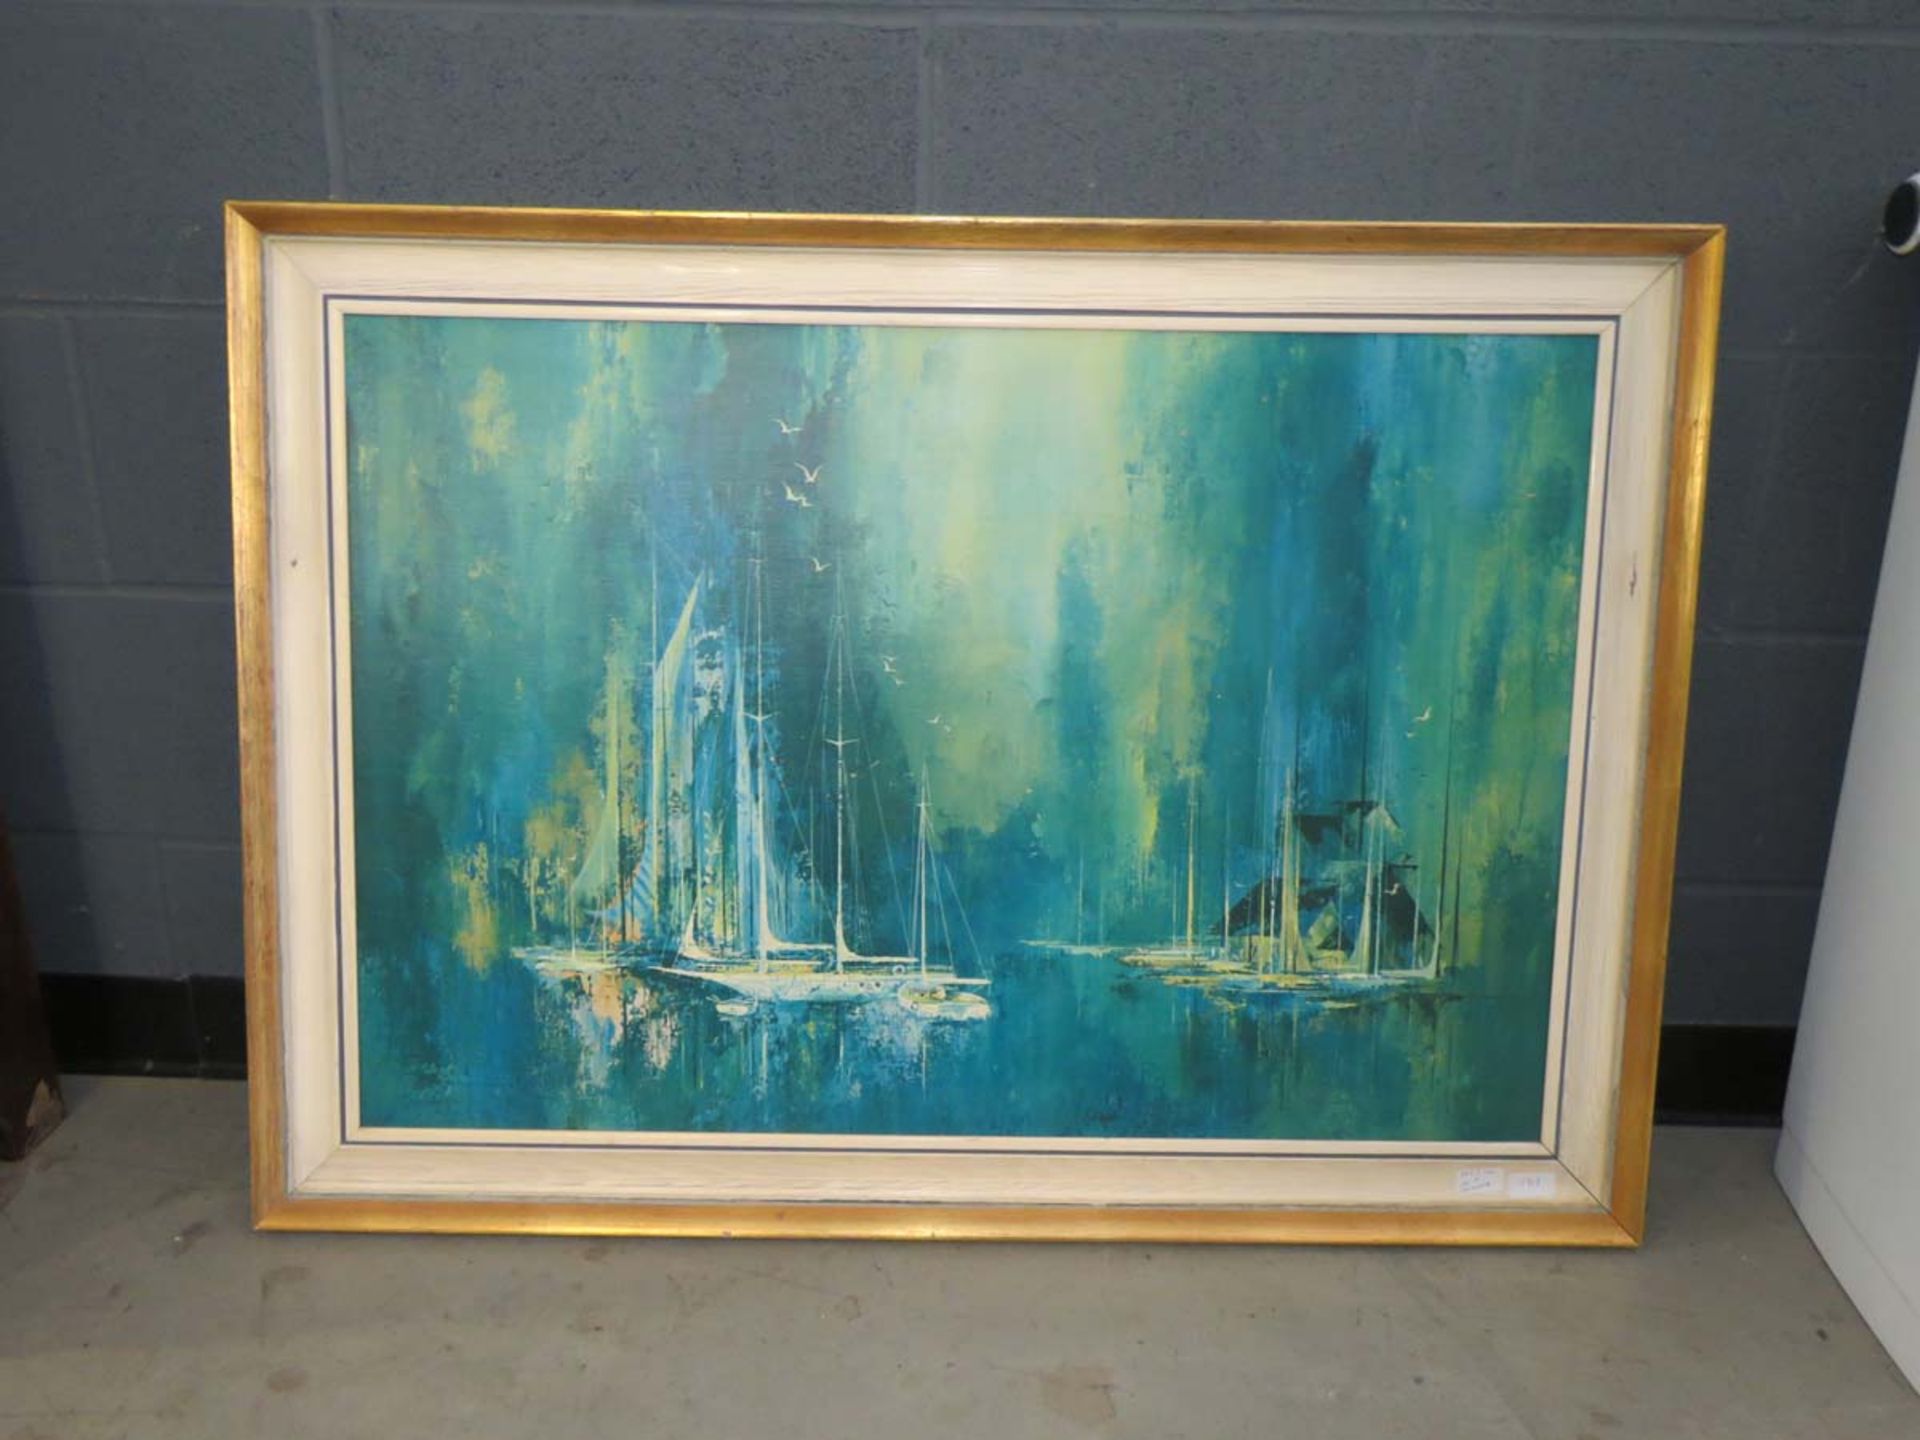 Print of yachts in harbour entitled 'Port of Call'